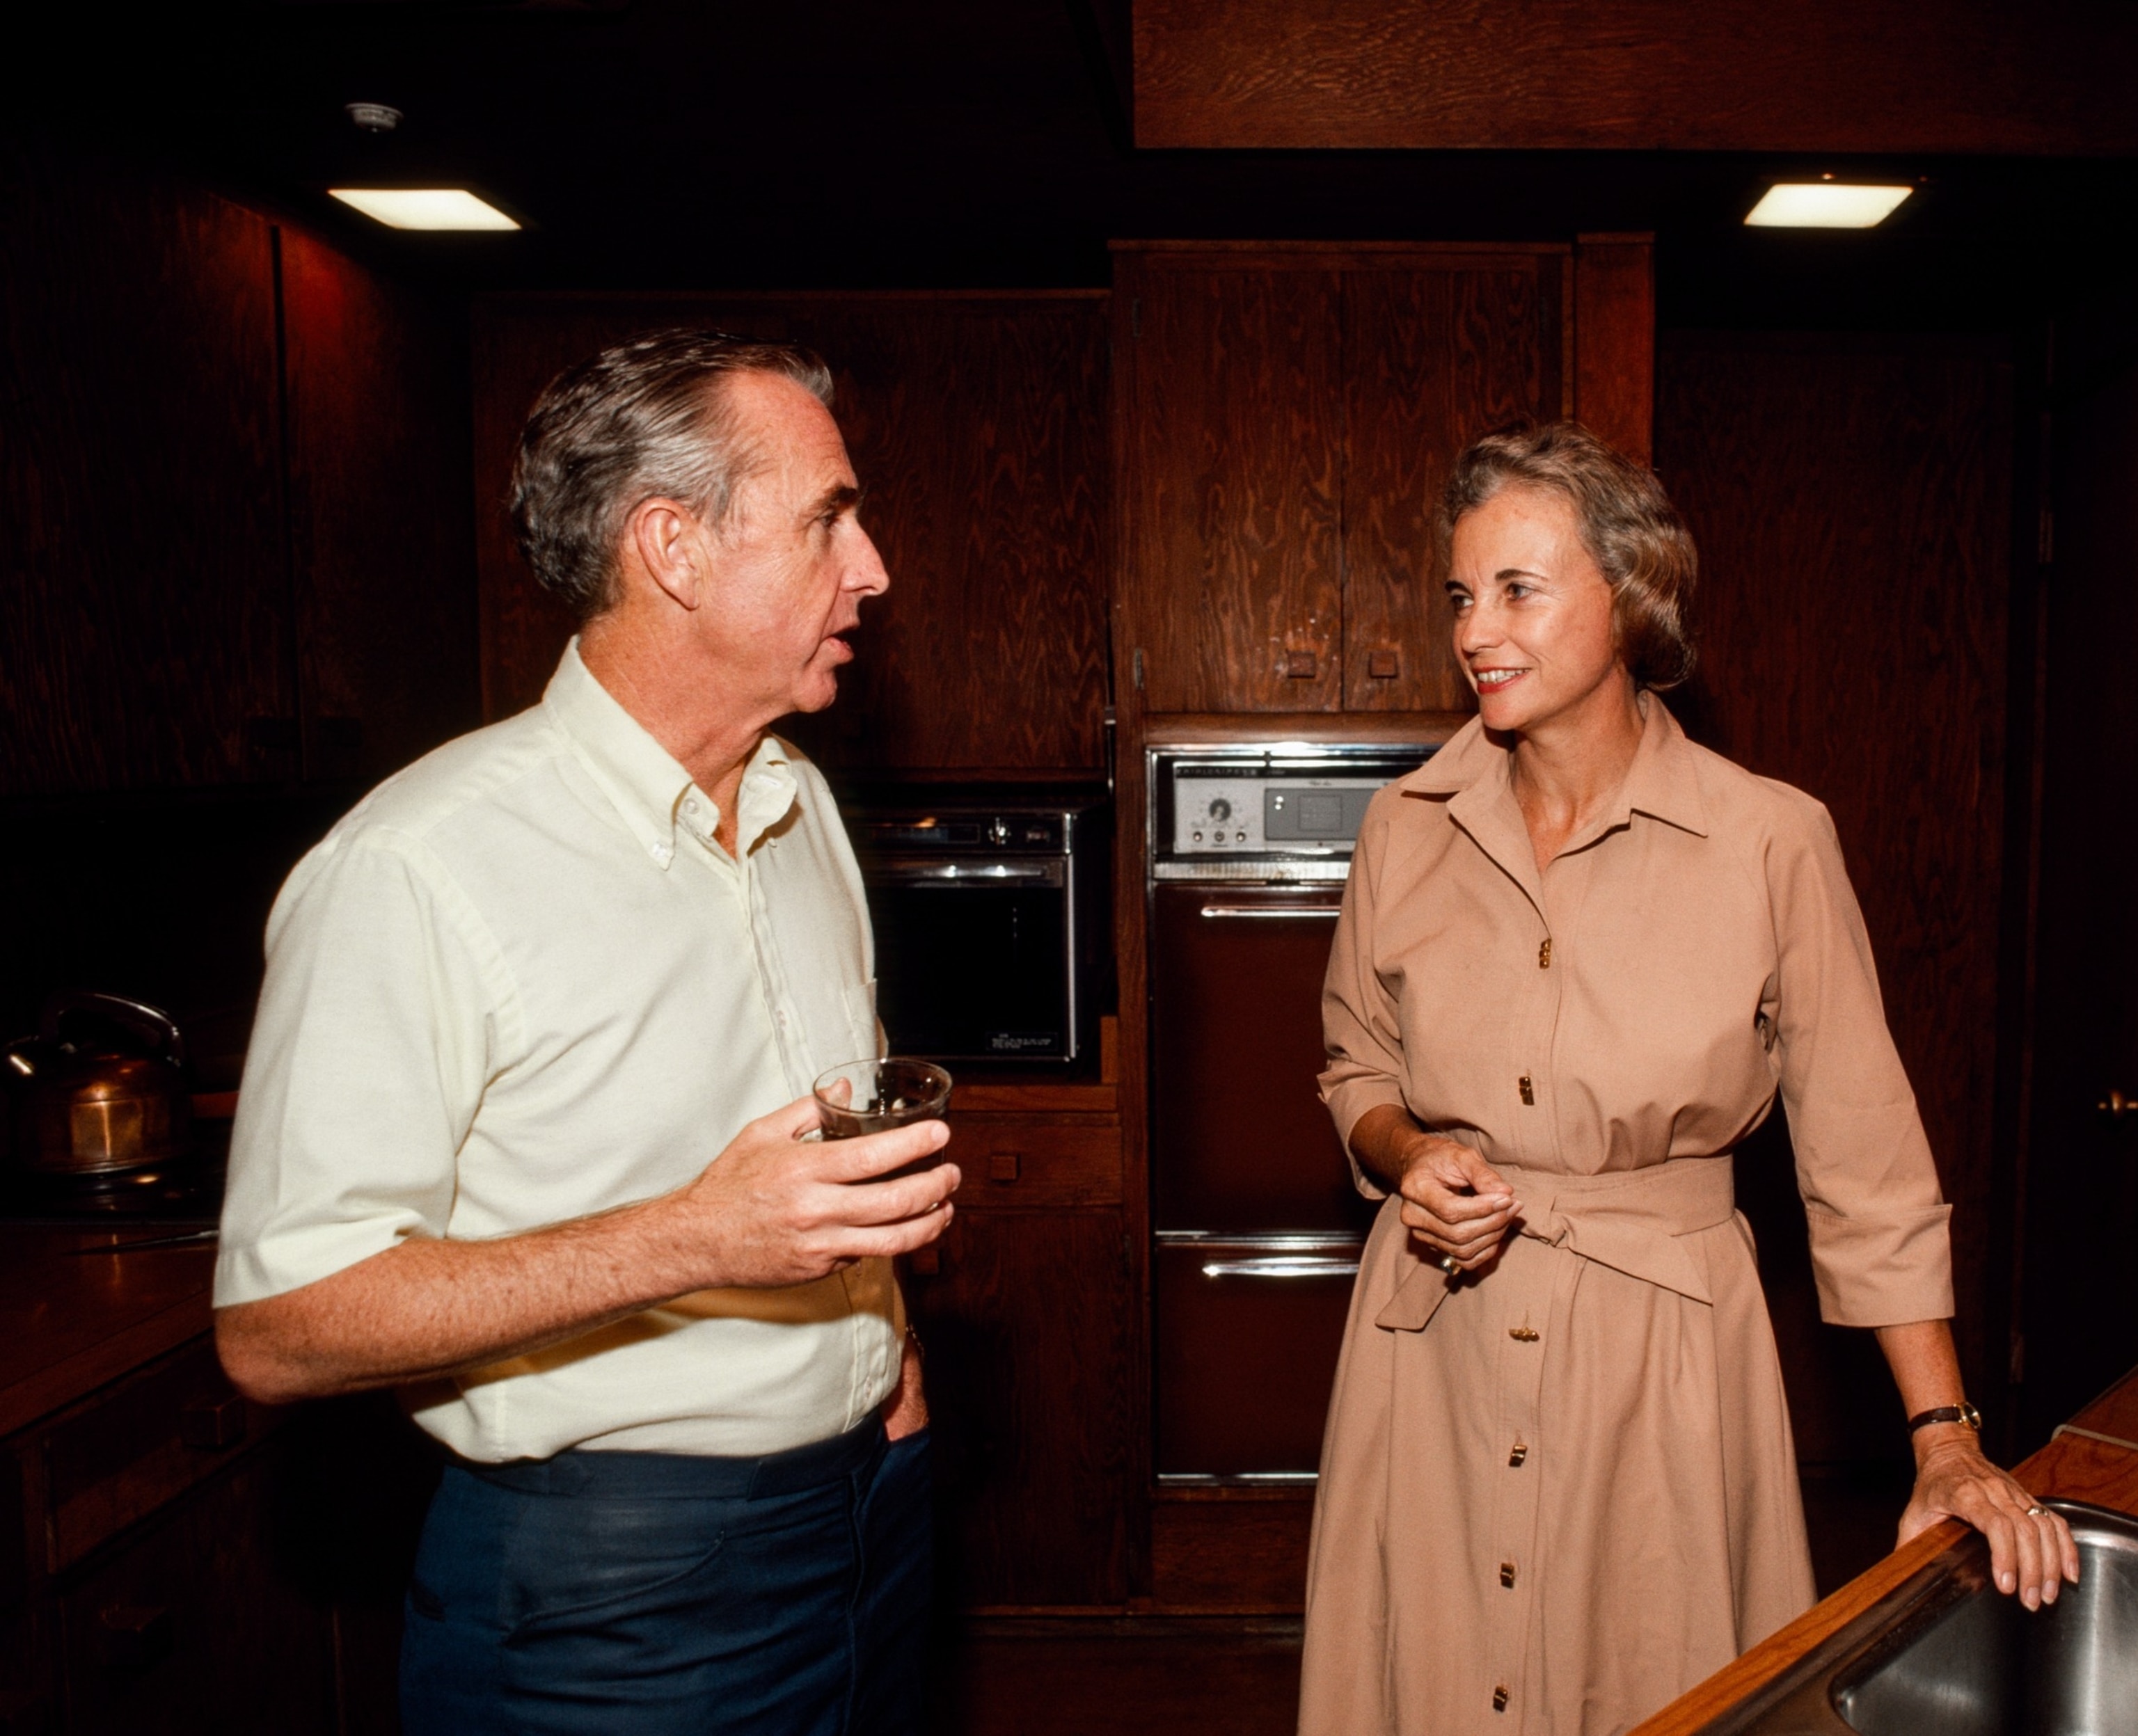 PHOTO: Supreme Court Justice Sandra Day O'Connor (R) and her husband, John Jay O'Connor, at their home, circa 1981, in Paradise Valley, Ariz.